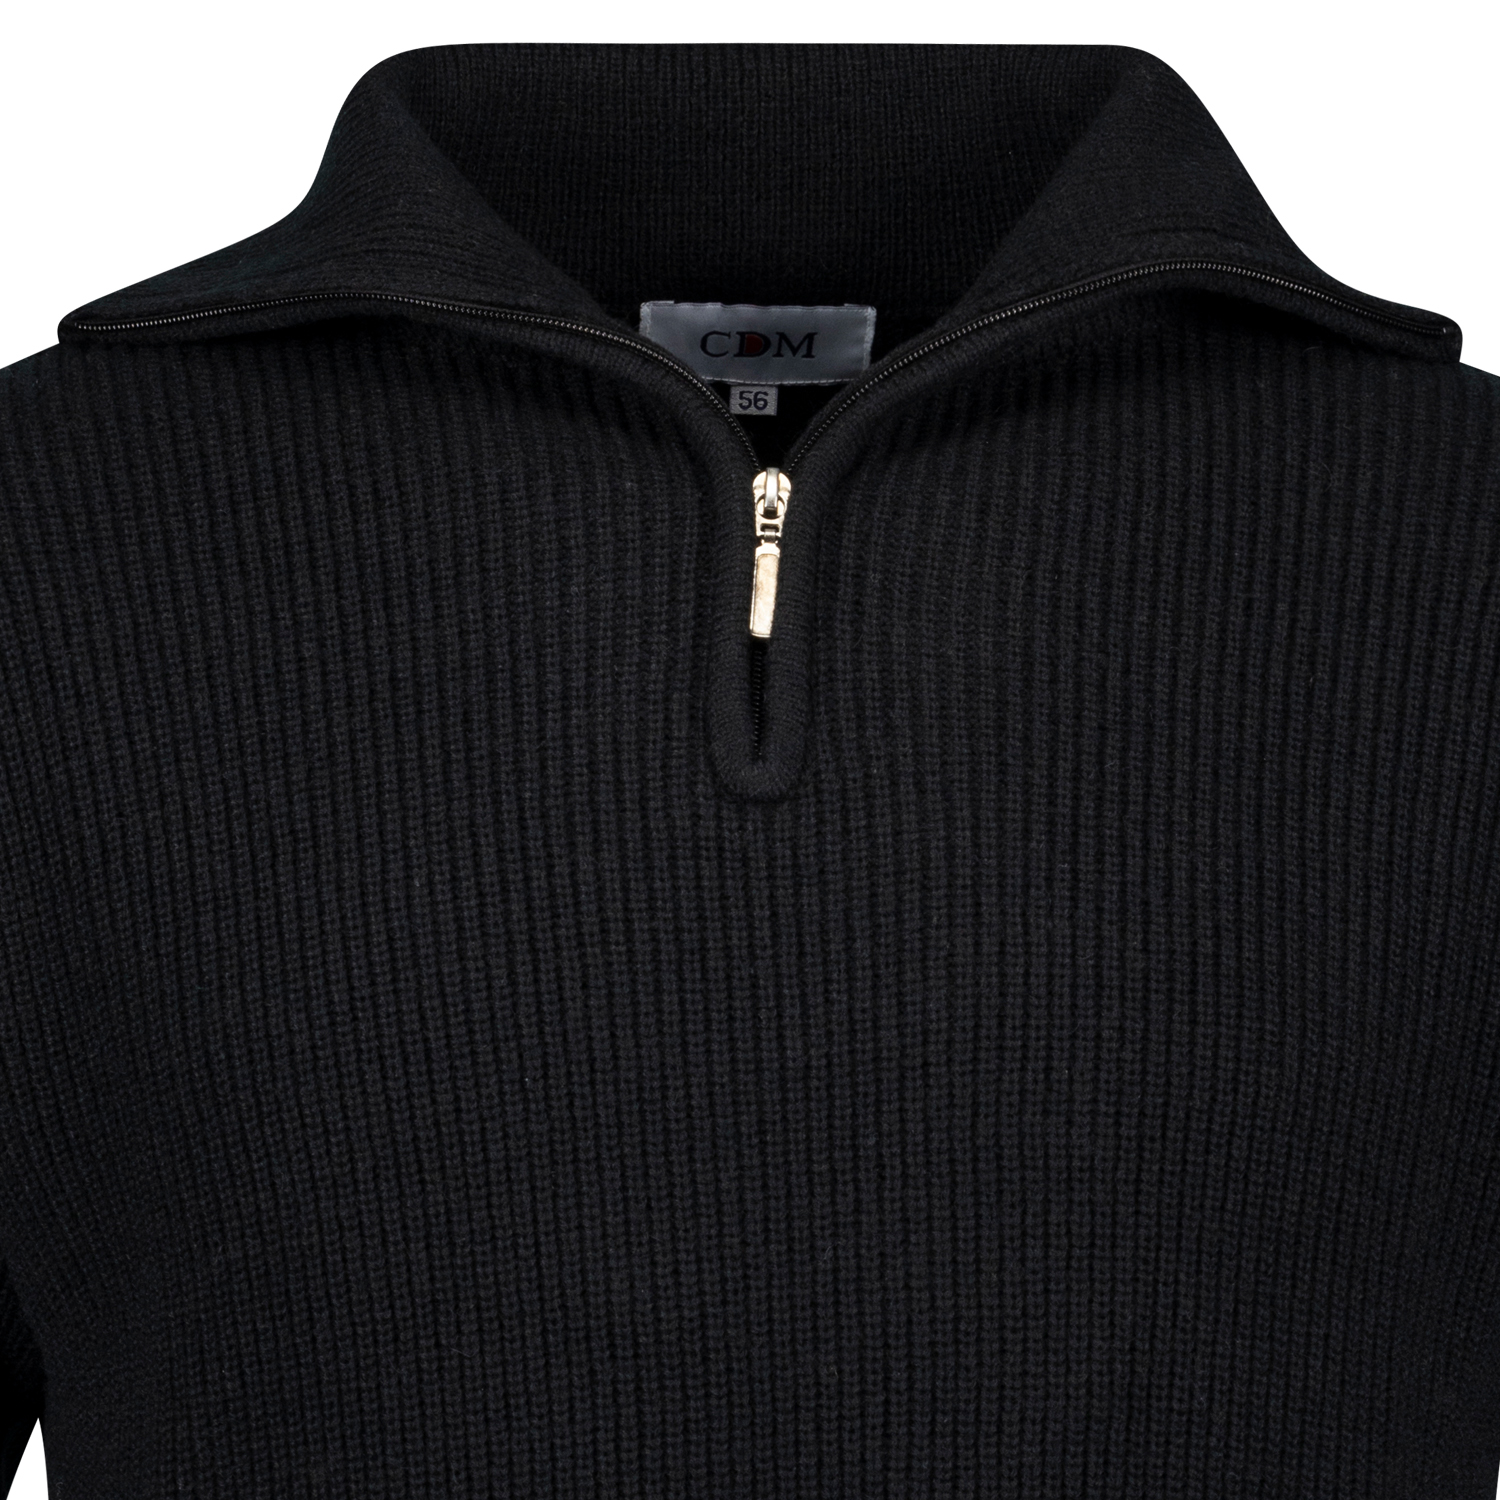 Knitted sweater in black by CDM in large sizes up to 9XL